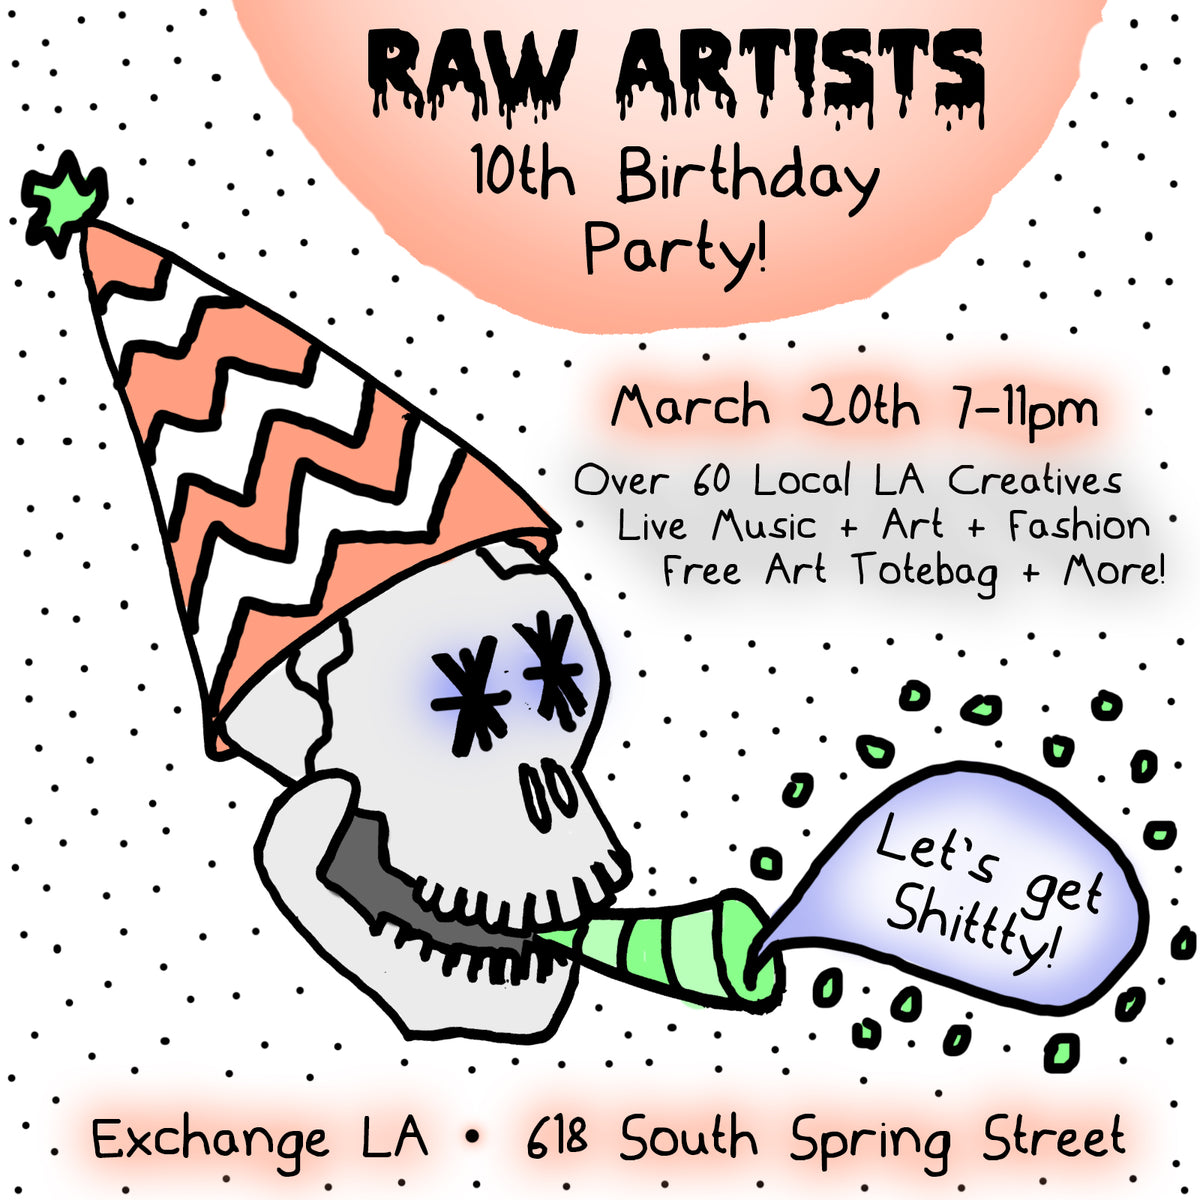 MARCH 20, 2019 // RAW ARTISTS 10TH BIRTHDAY PARTY